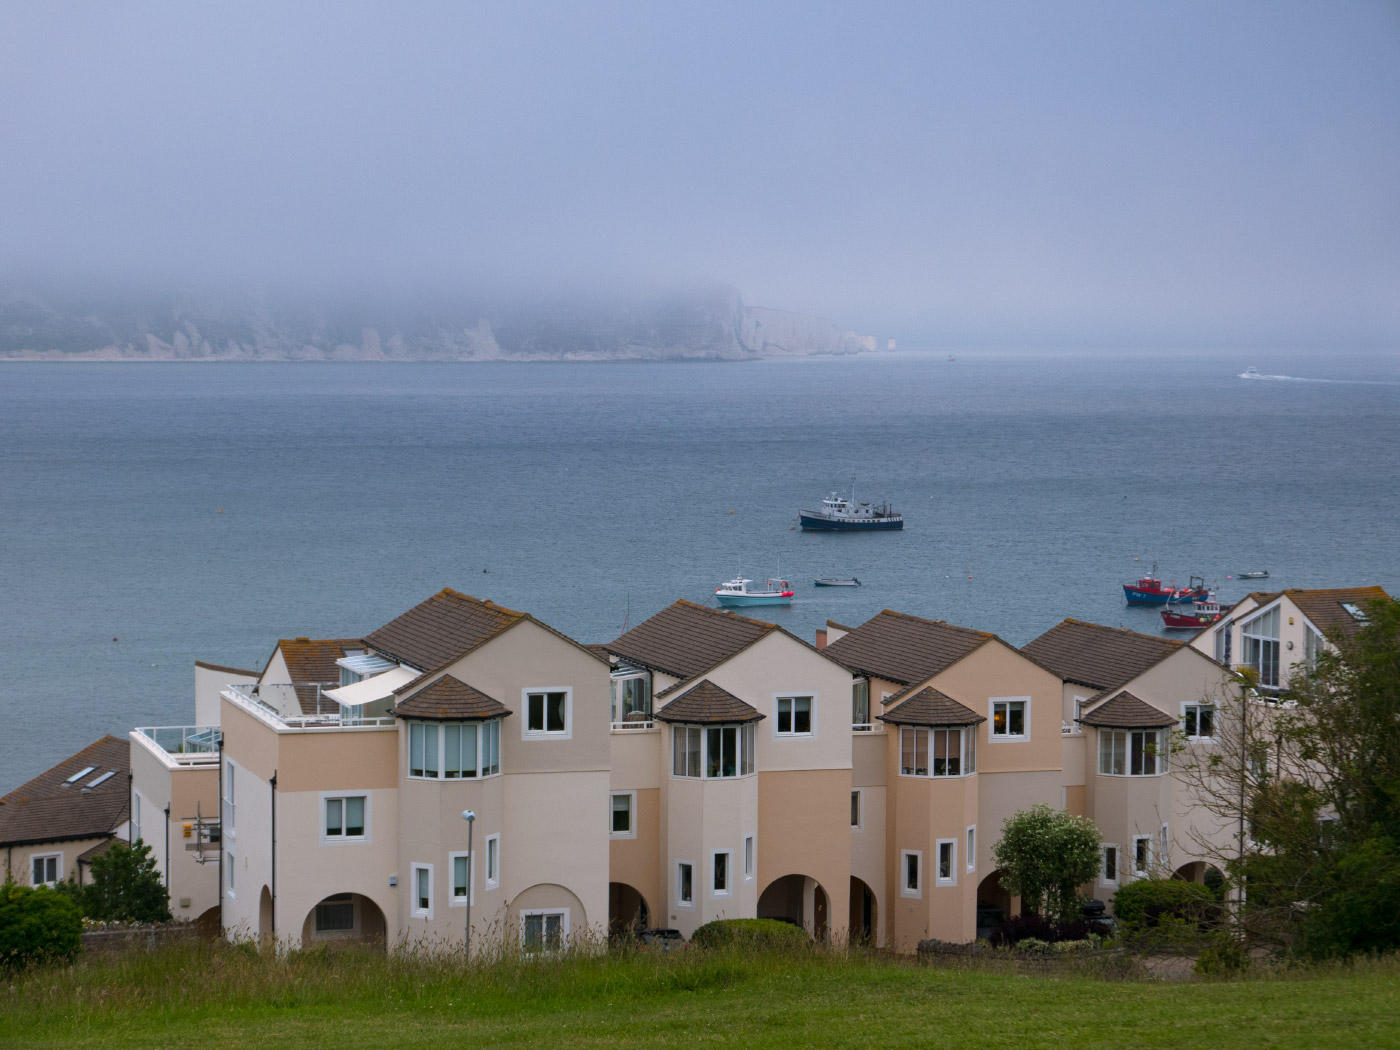 Low mist over Swanage Bay